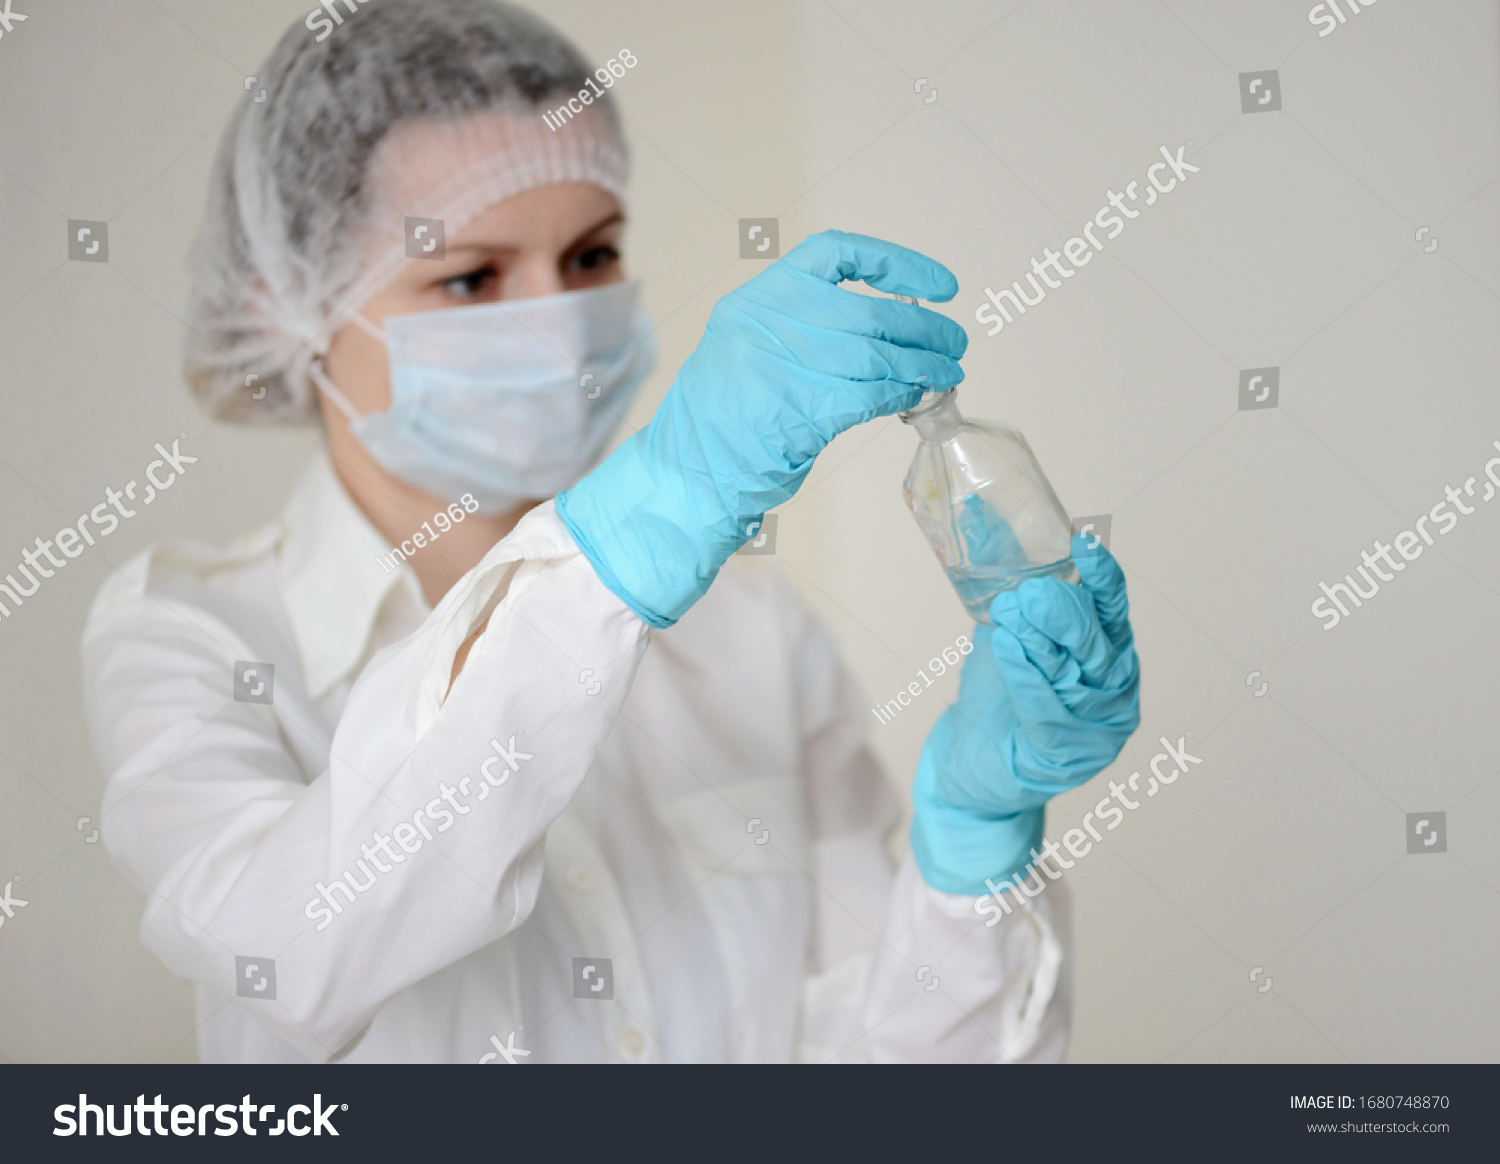  A helth care worker is looking at the chemical analysis result #1680748870